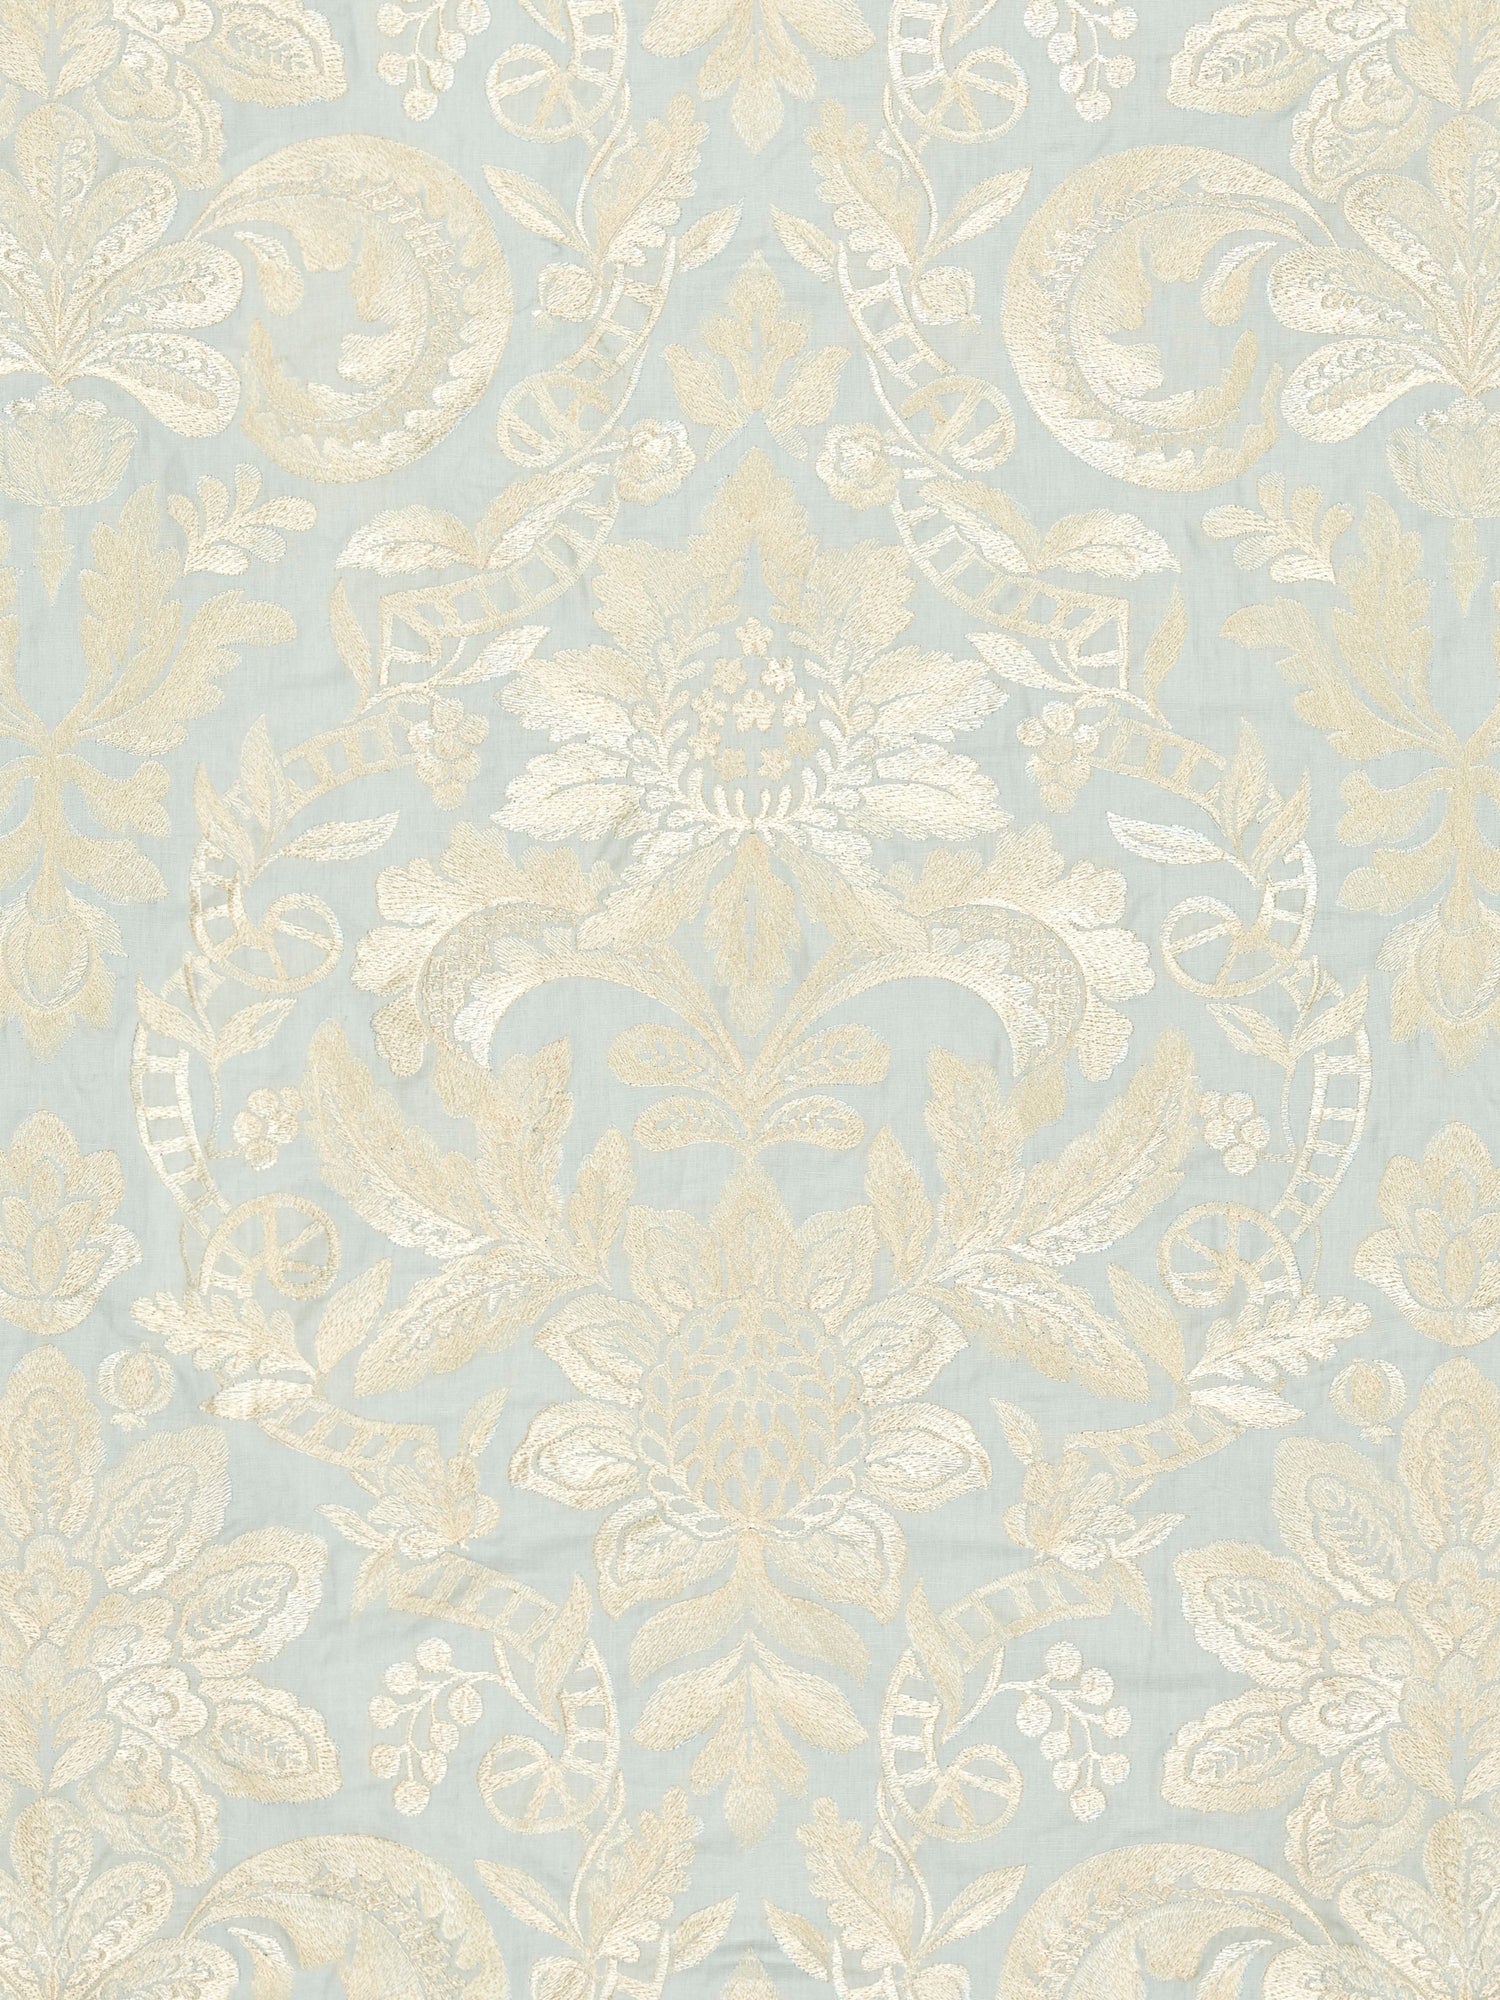 Elizabeth Damask Embroidery fabric in aquamarine color - pattern number SC 000227086 - by Scalamandre in the Scalamandre Fabrics Book 1 collection